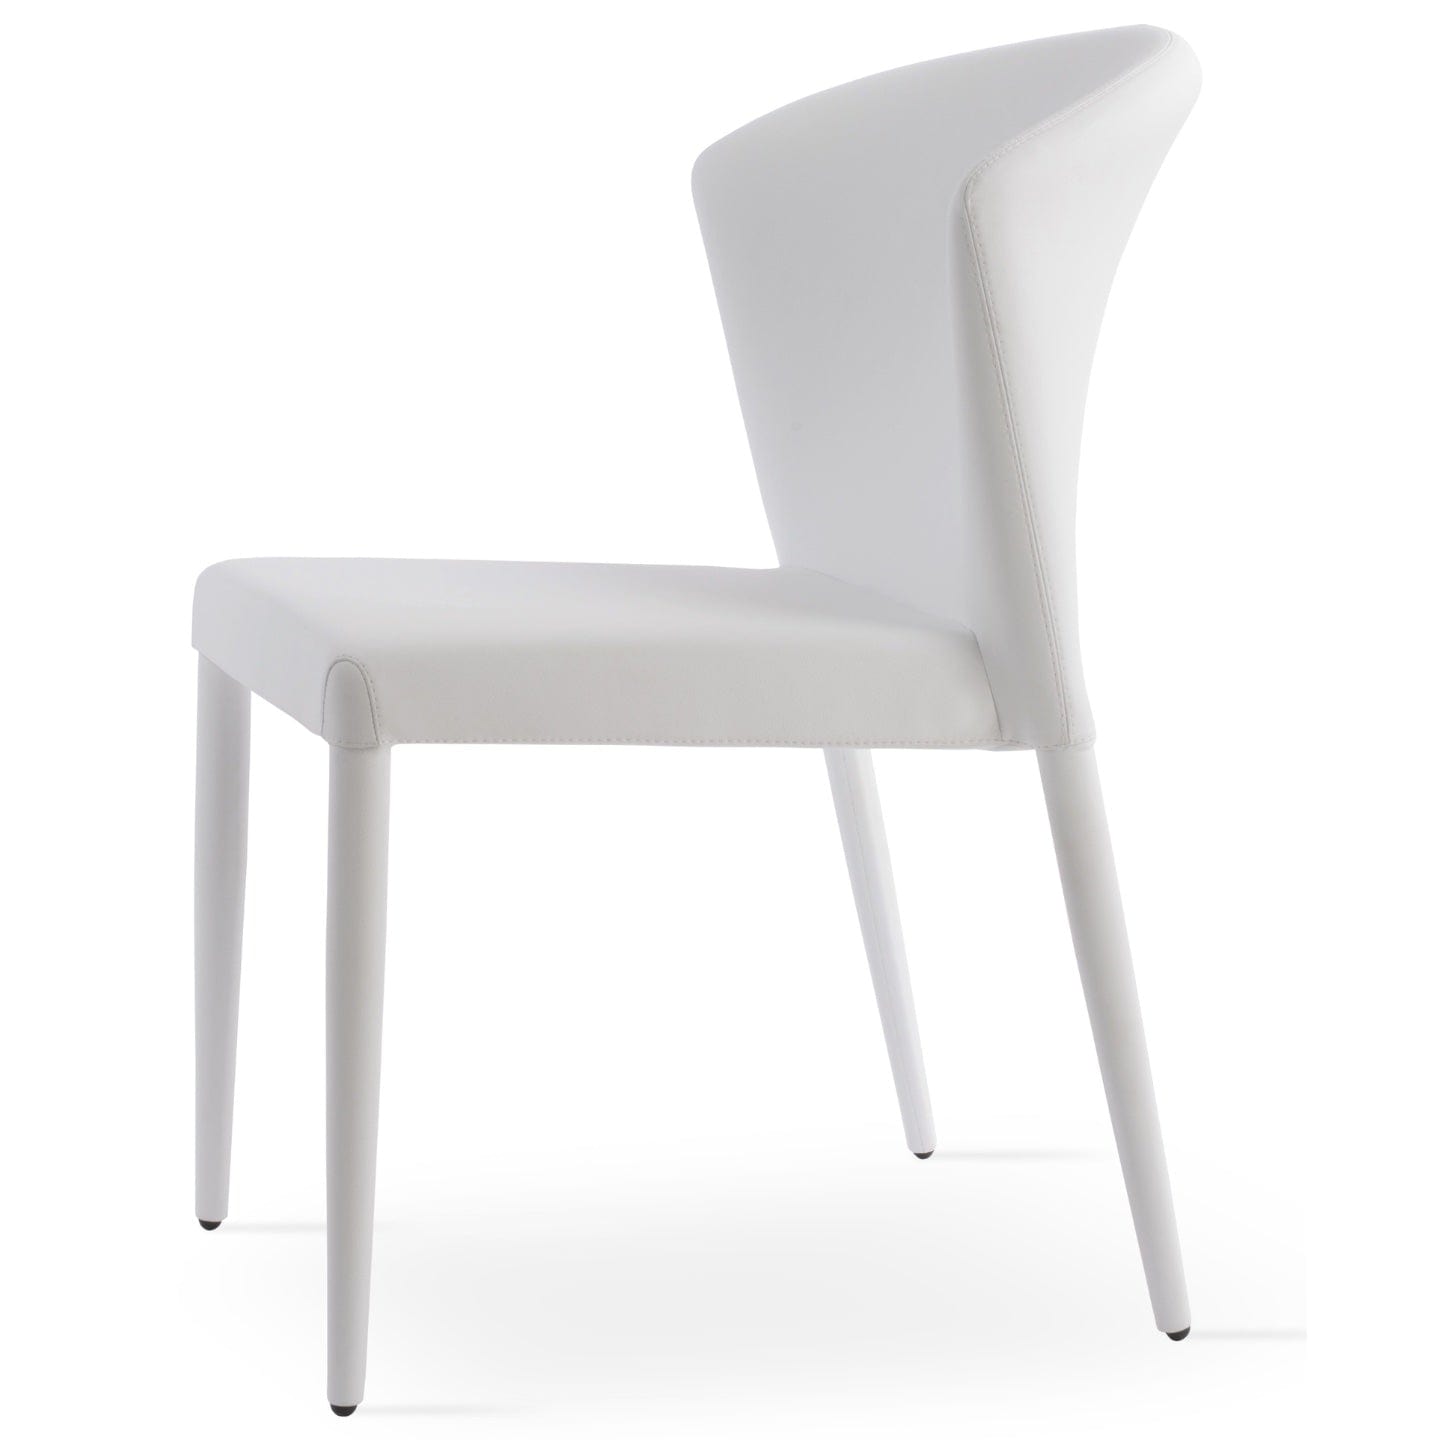 sohoConcept Kitchen & Dining Room Chairs Capri Stackable Restaurant Chairs | White Leather Metal Dining Chairs